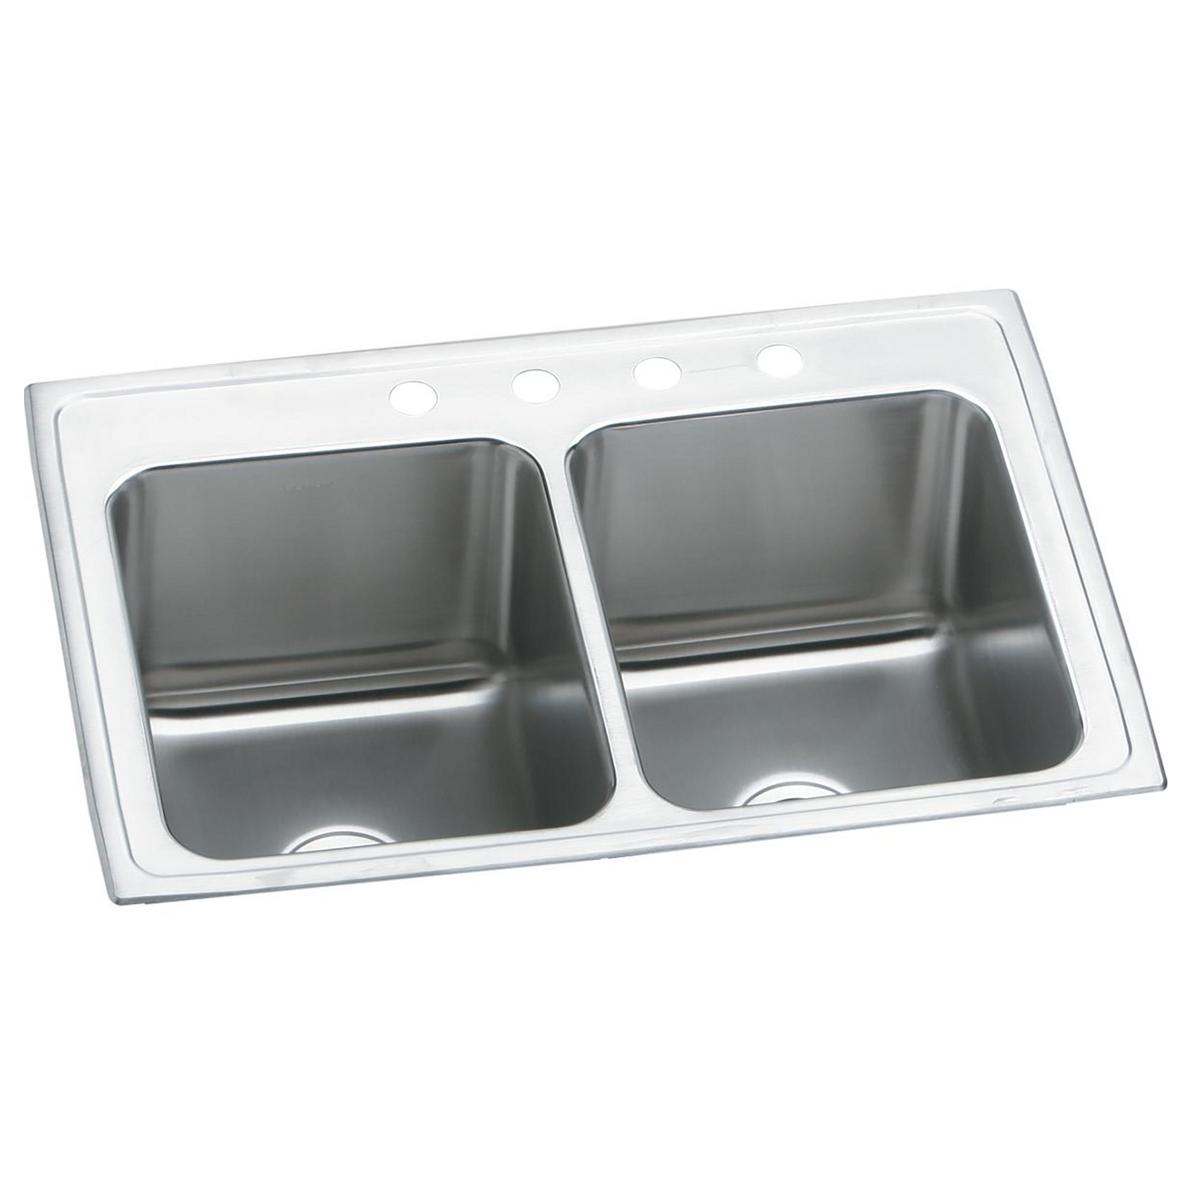 Elkay Lustertone Classic 25" x 19-1/2" x 10-1/8" MR2-Hole Equal Double Bowl Drop-in Sink